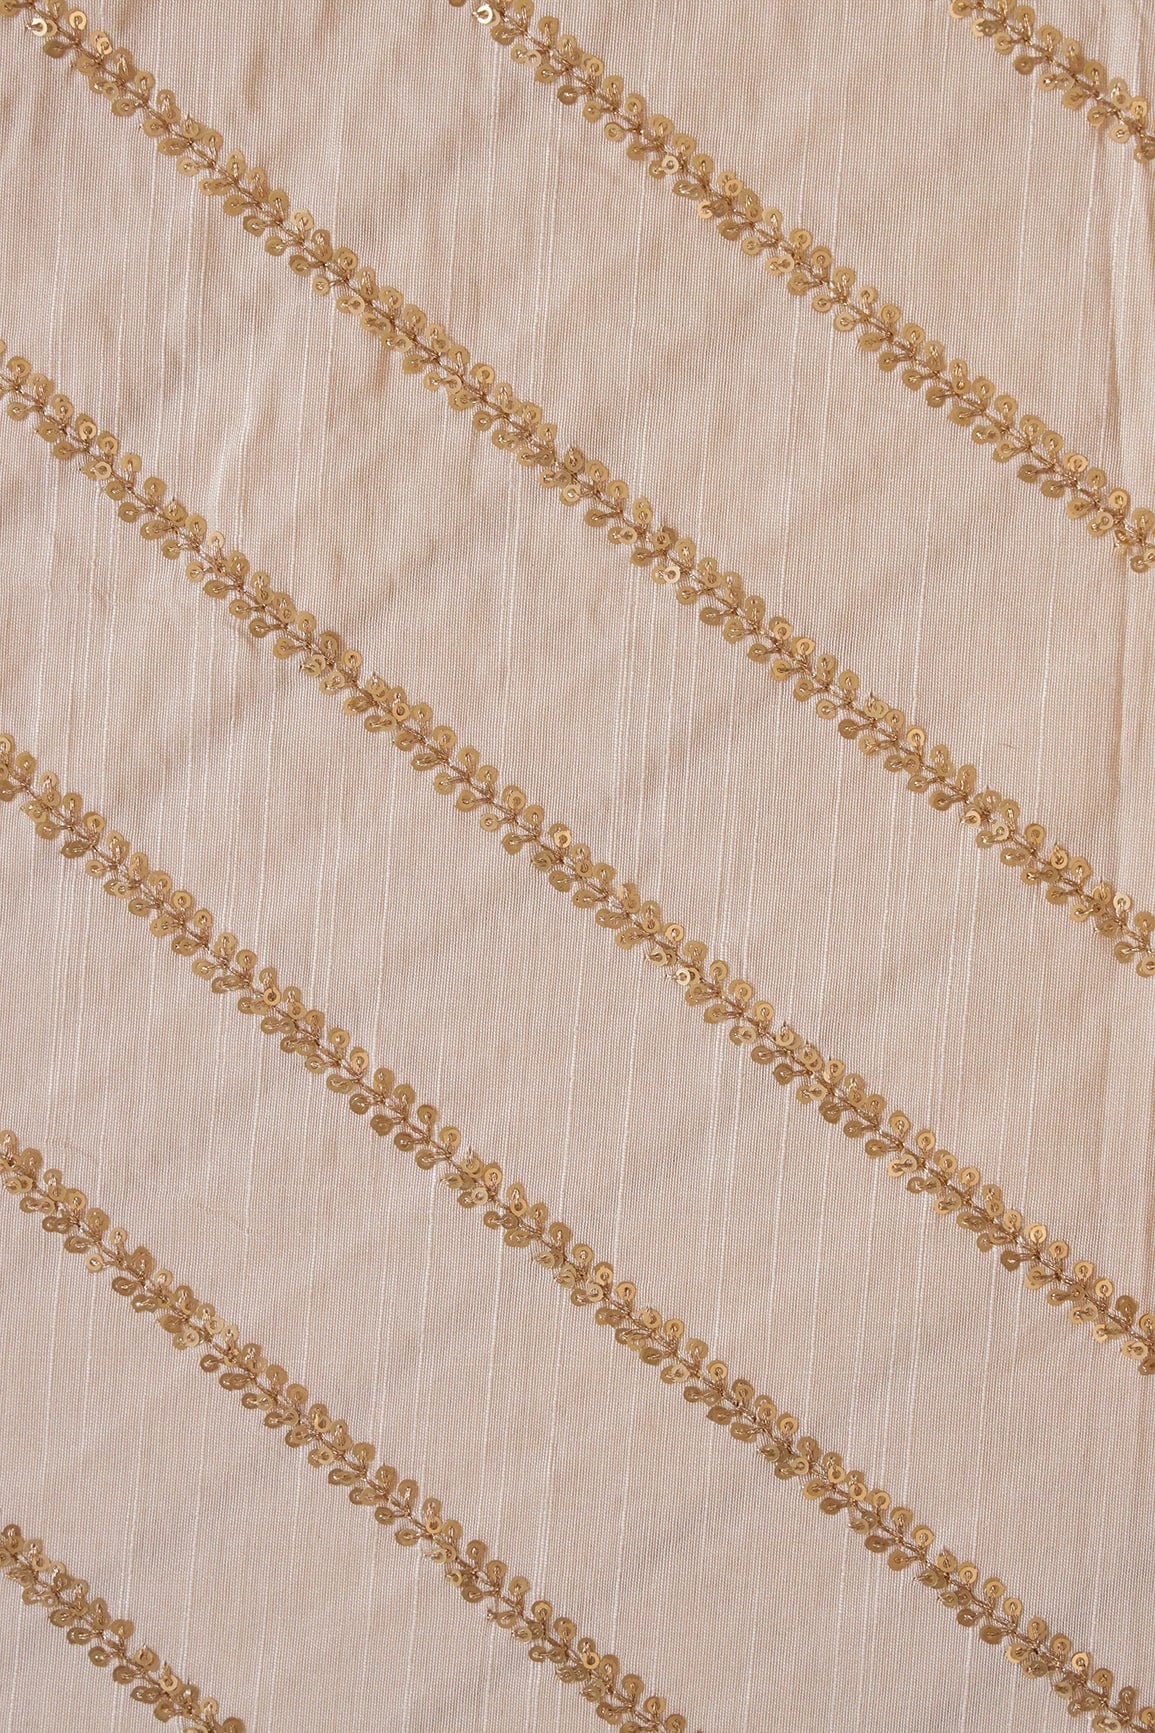 doeraa Embroidery Fabrics Gold Sequins With Gold Zari Stripes Embroidery Work On Off White Raw Silk Fabric